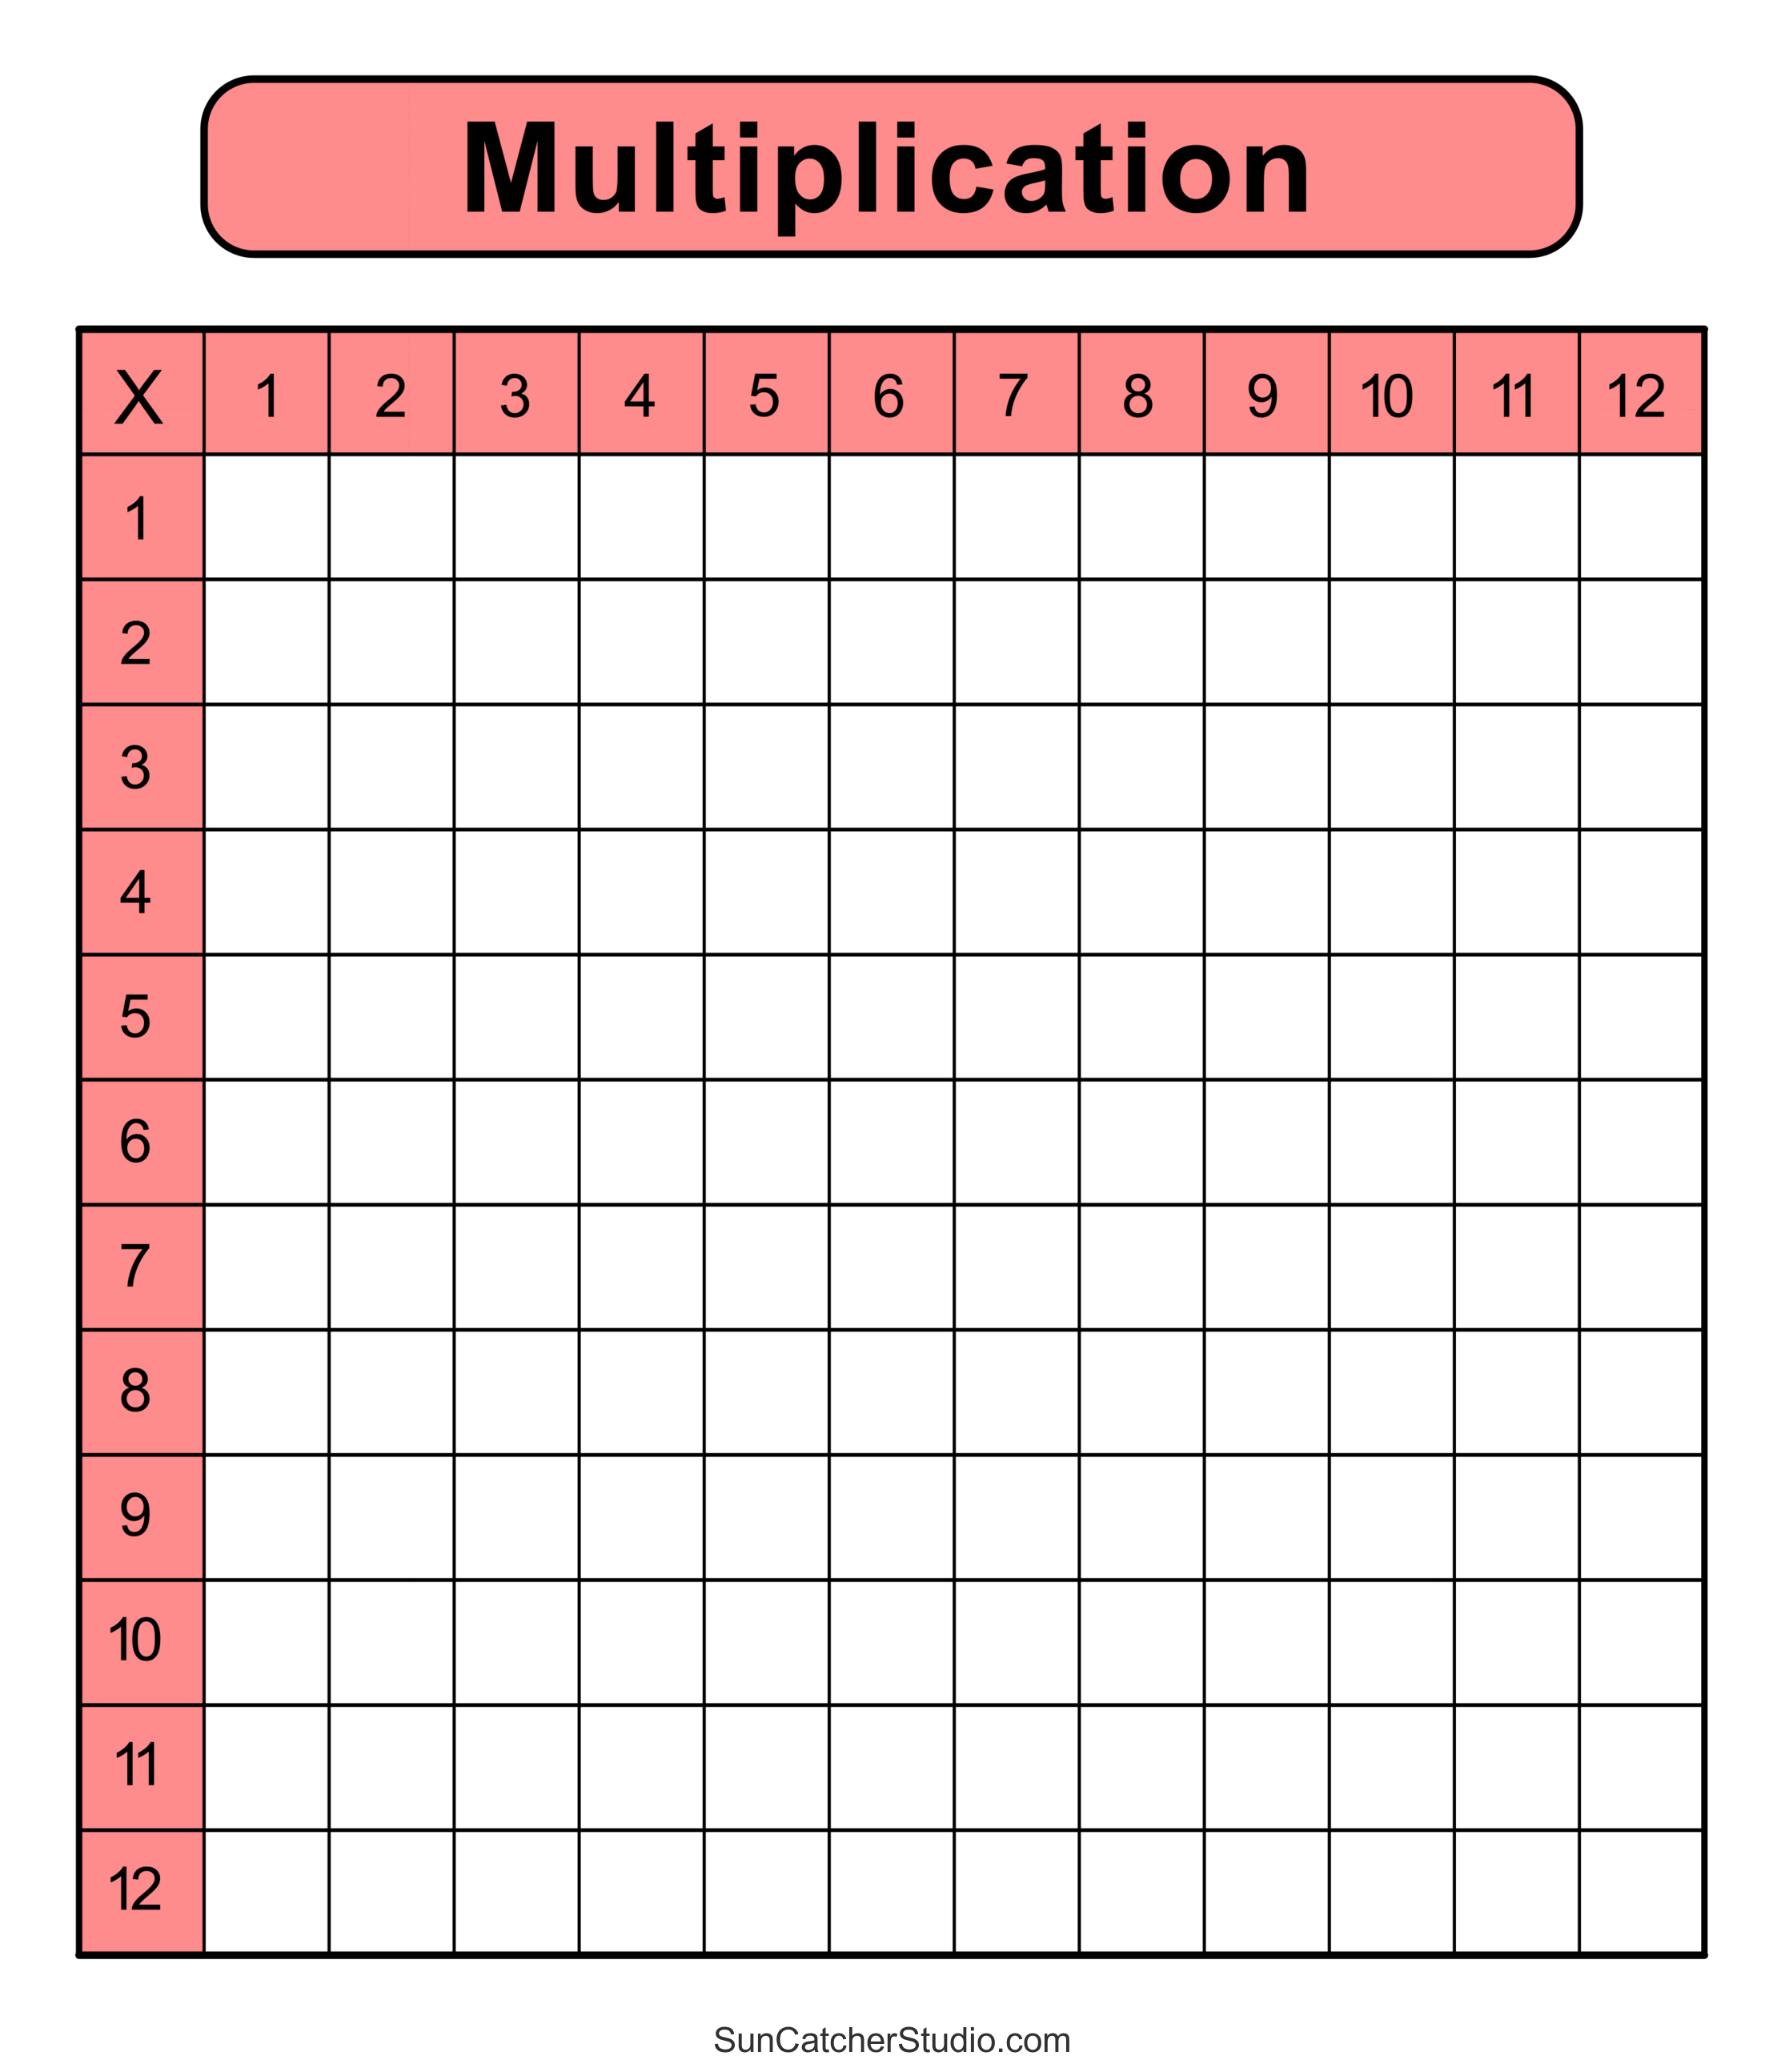 Multiplication Table Fill Out